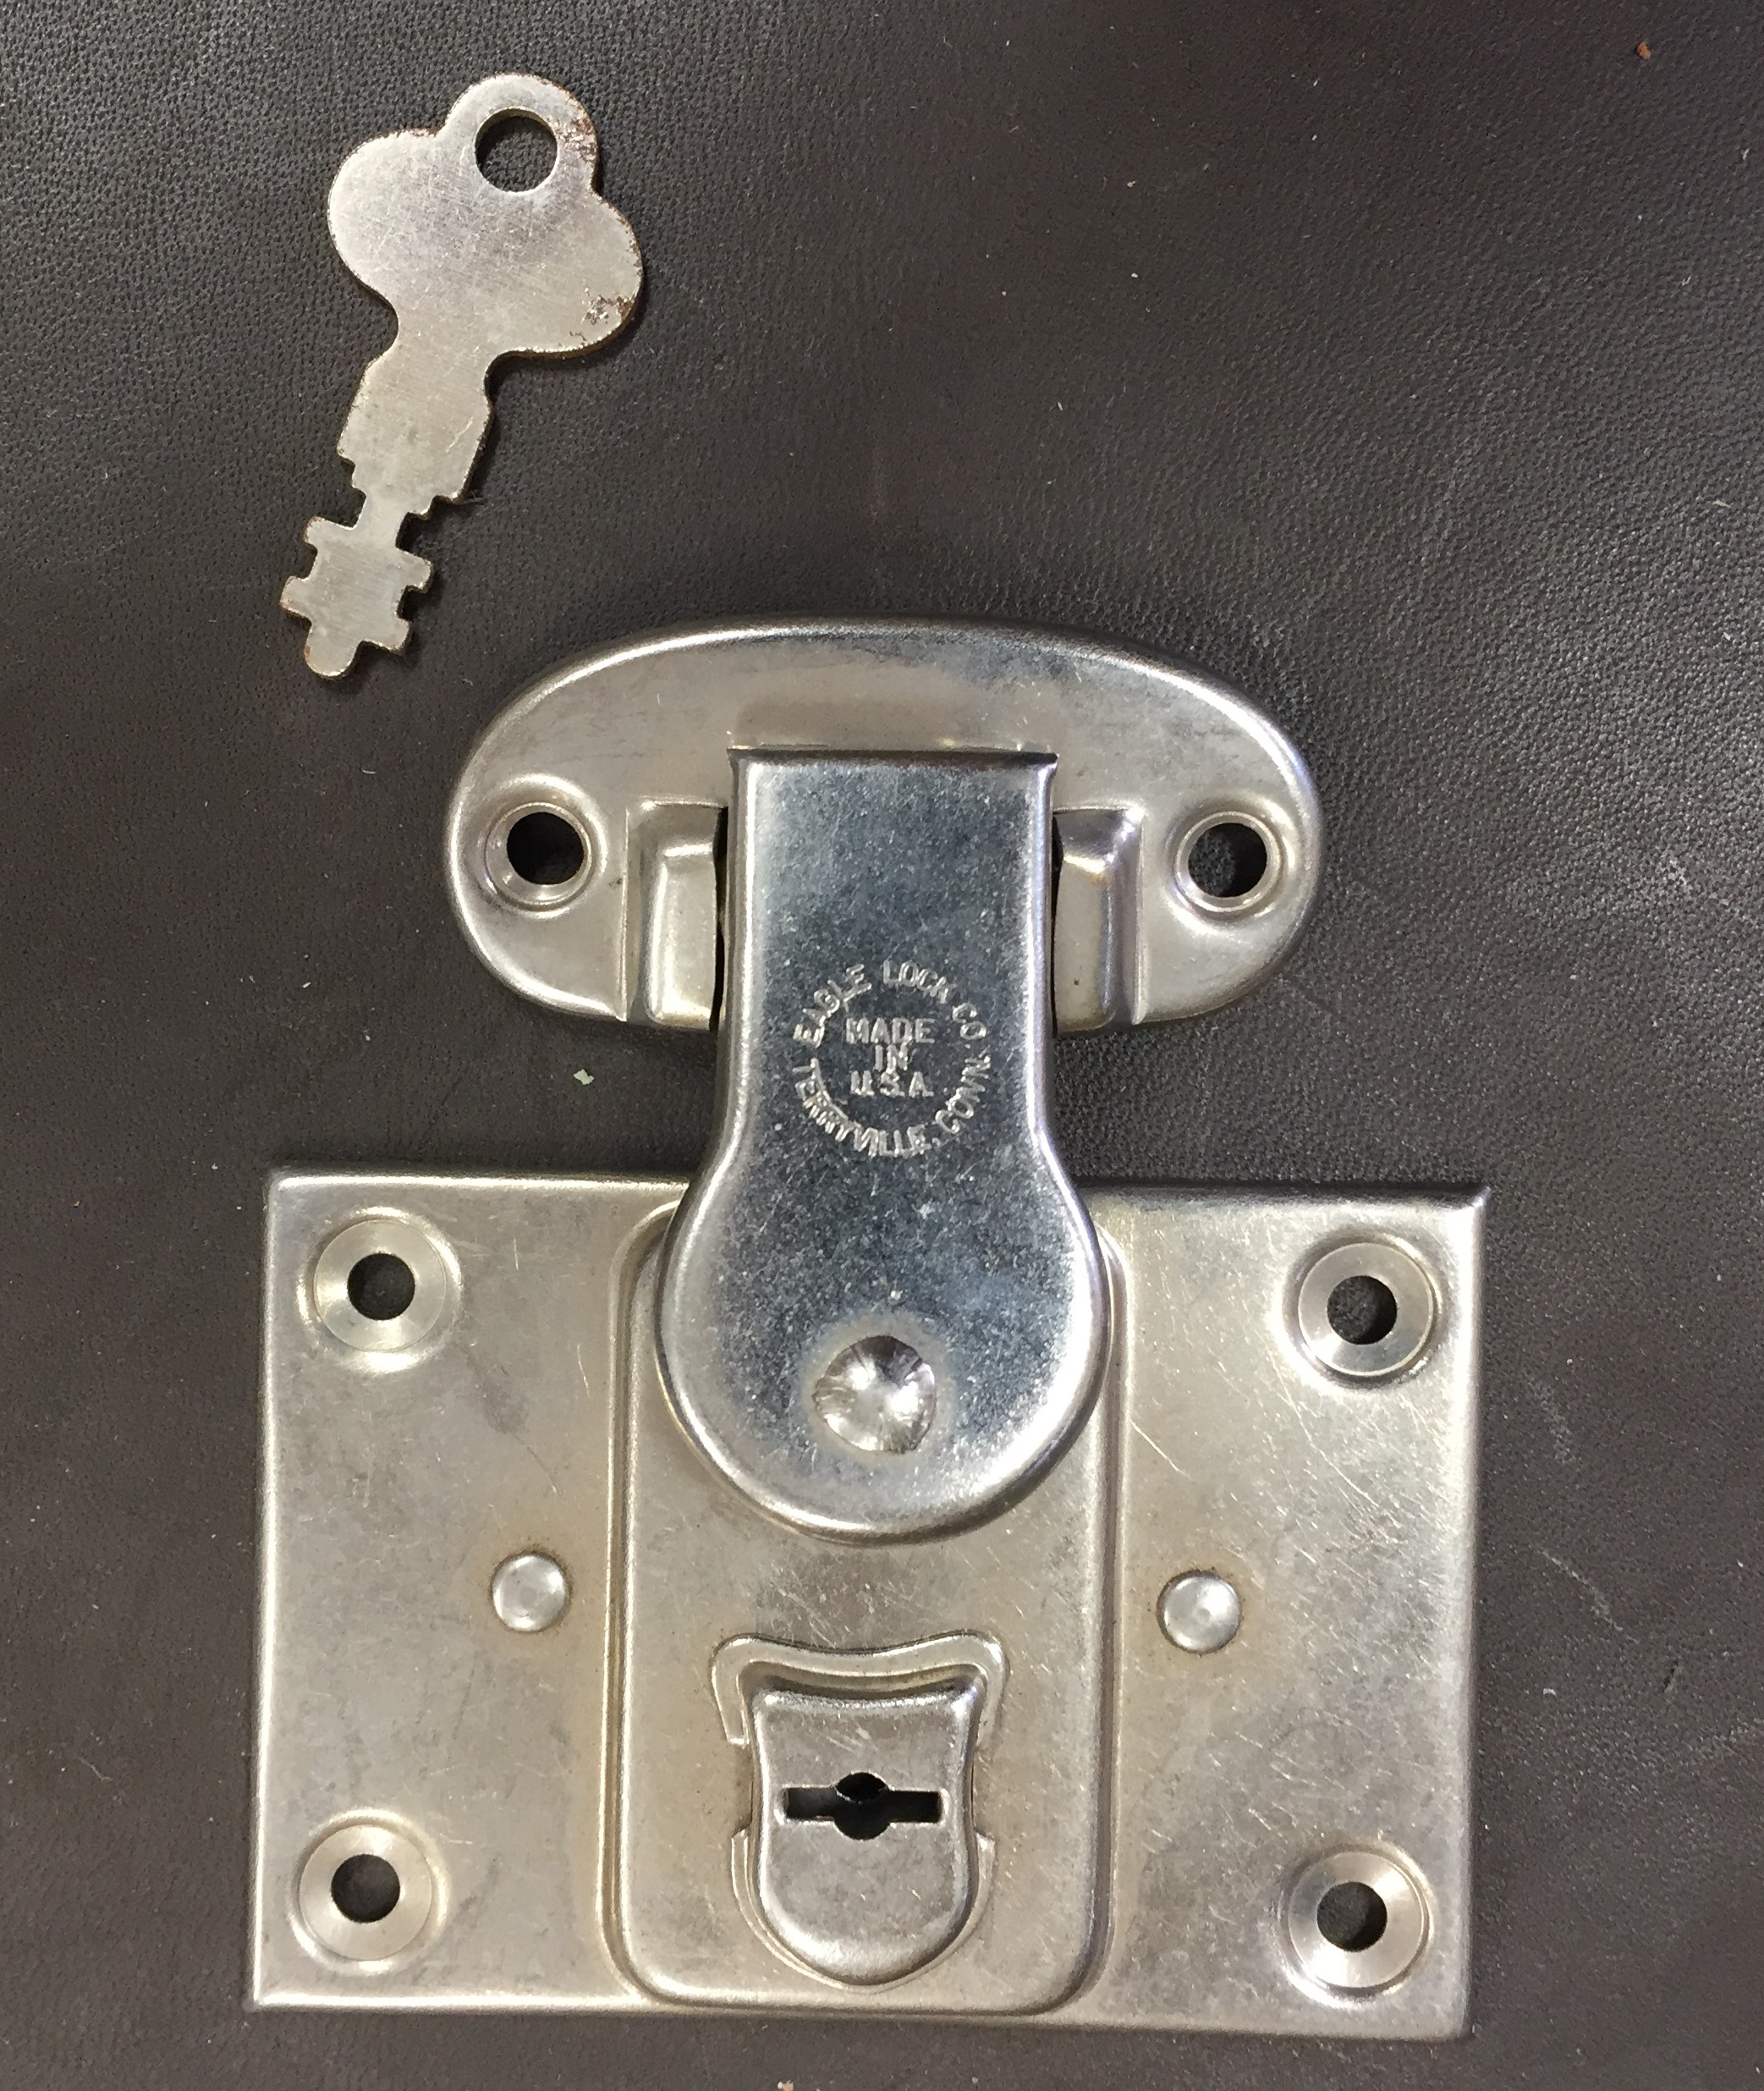 How to Pick an Old Trunk Lock? - 2 Simple Ways